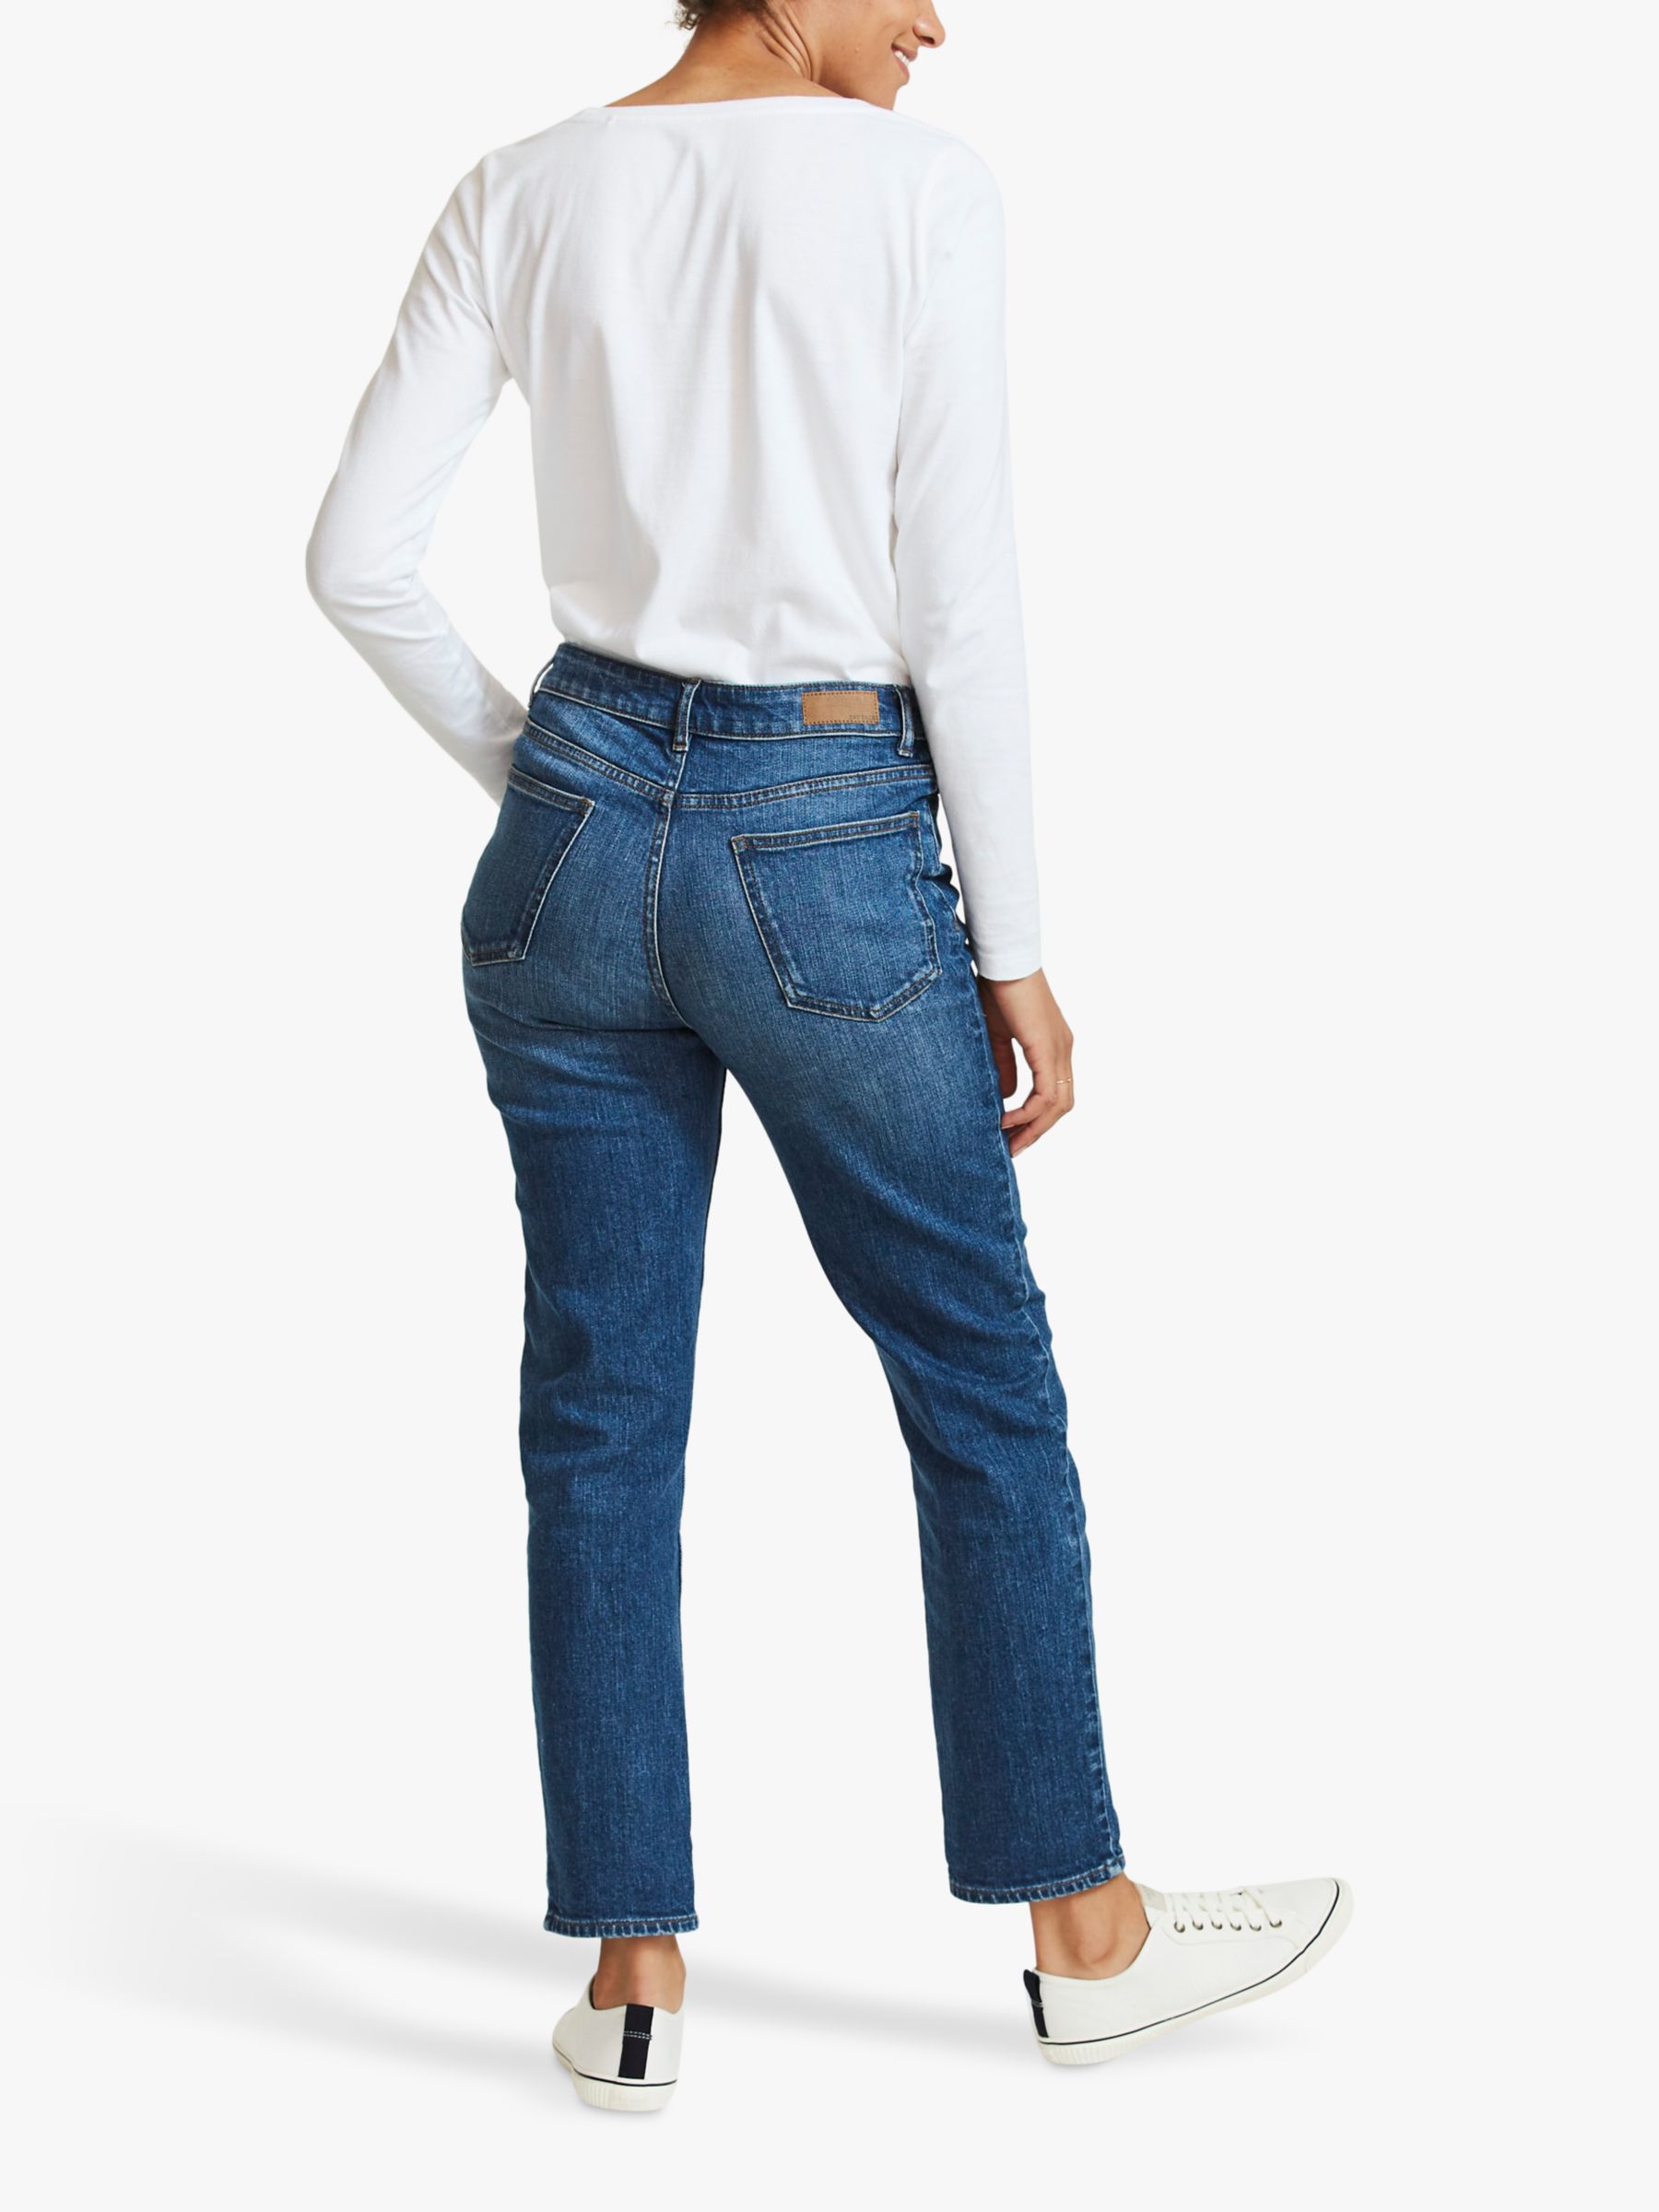 FatFace Chesham Girlfriend Jeans, Rinse Wash at John Lewis & Partners